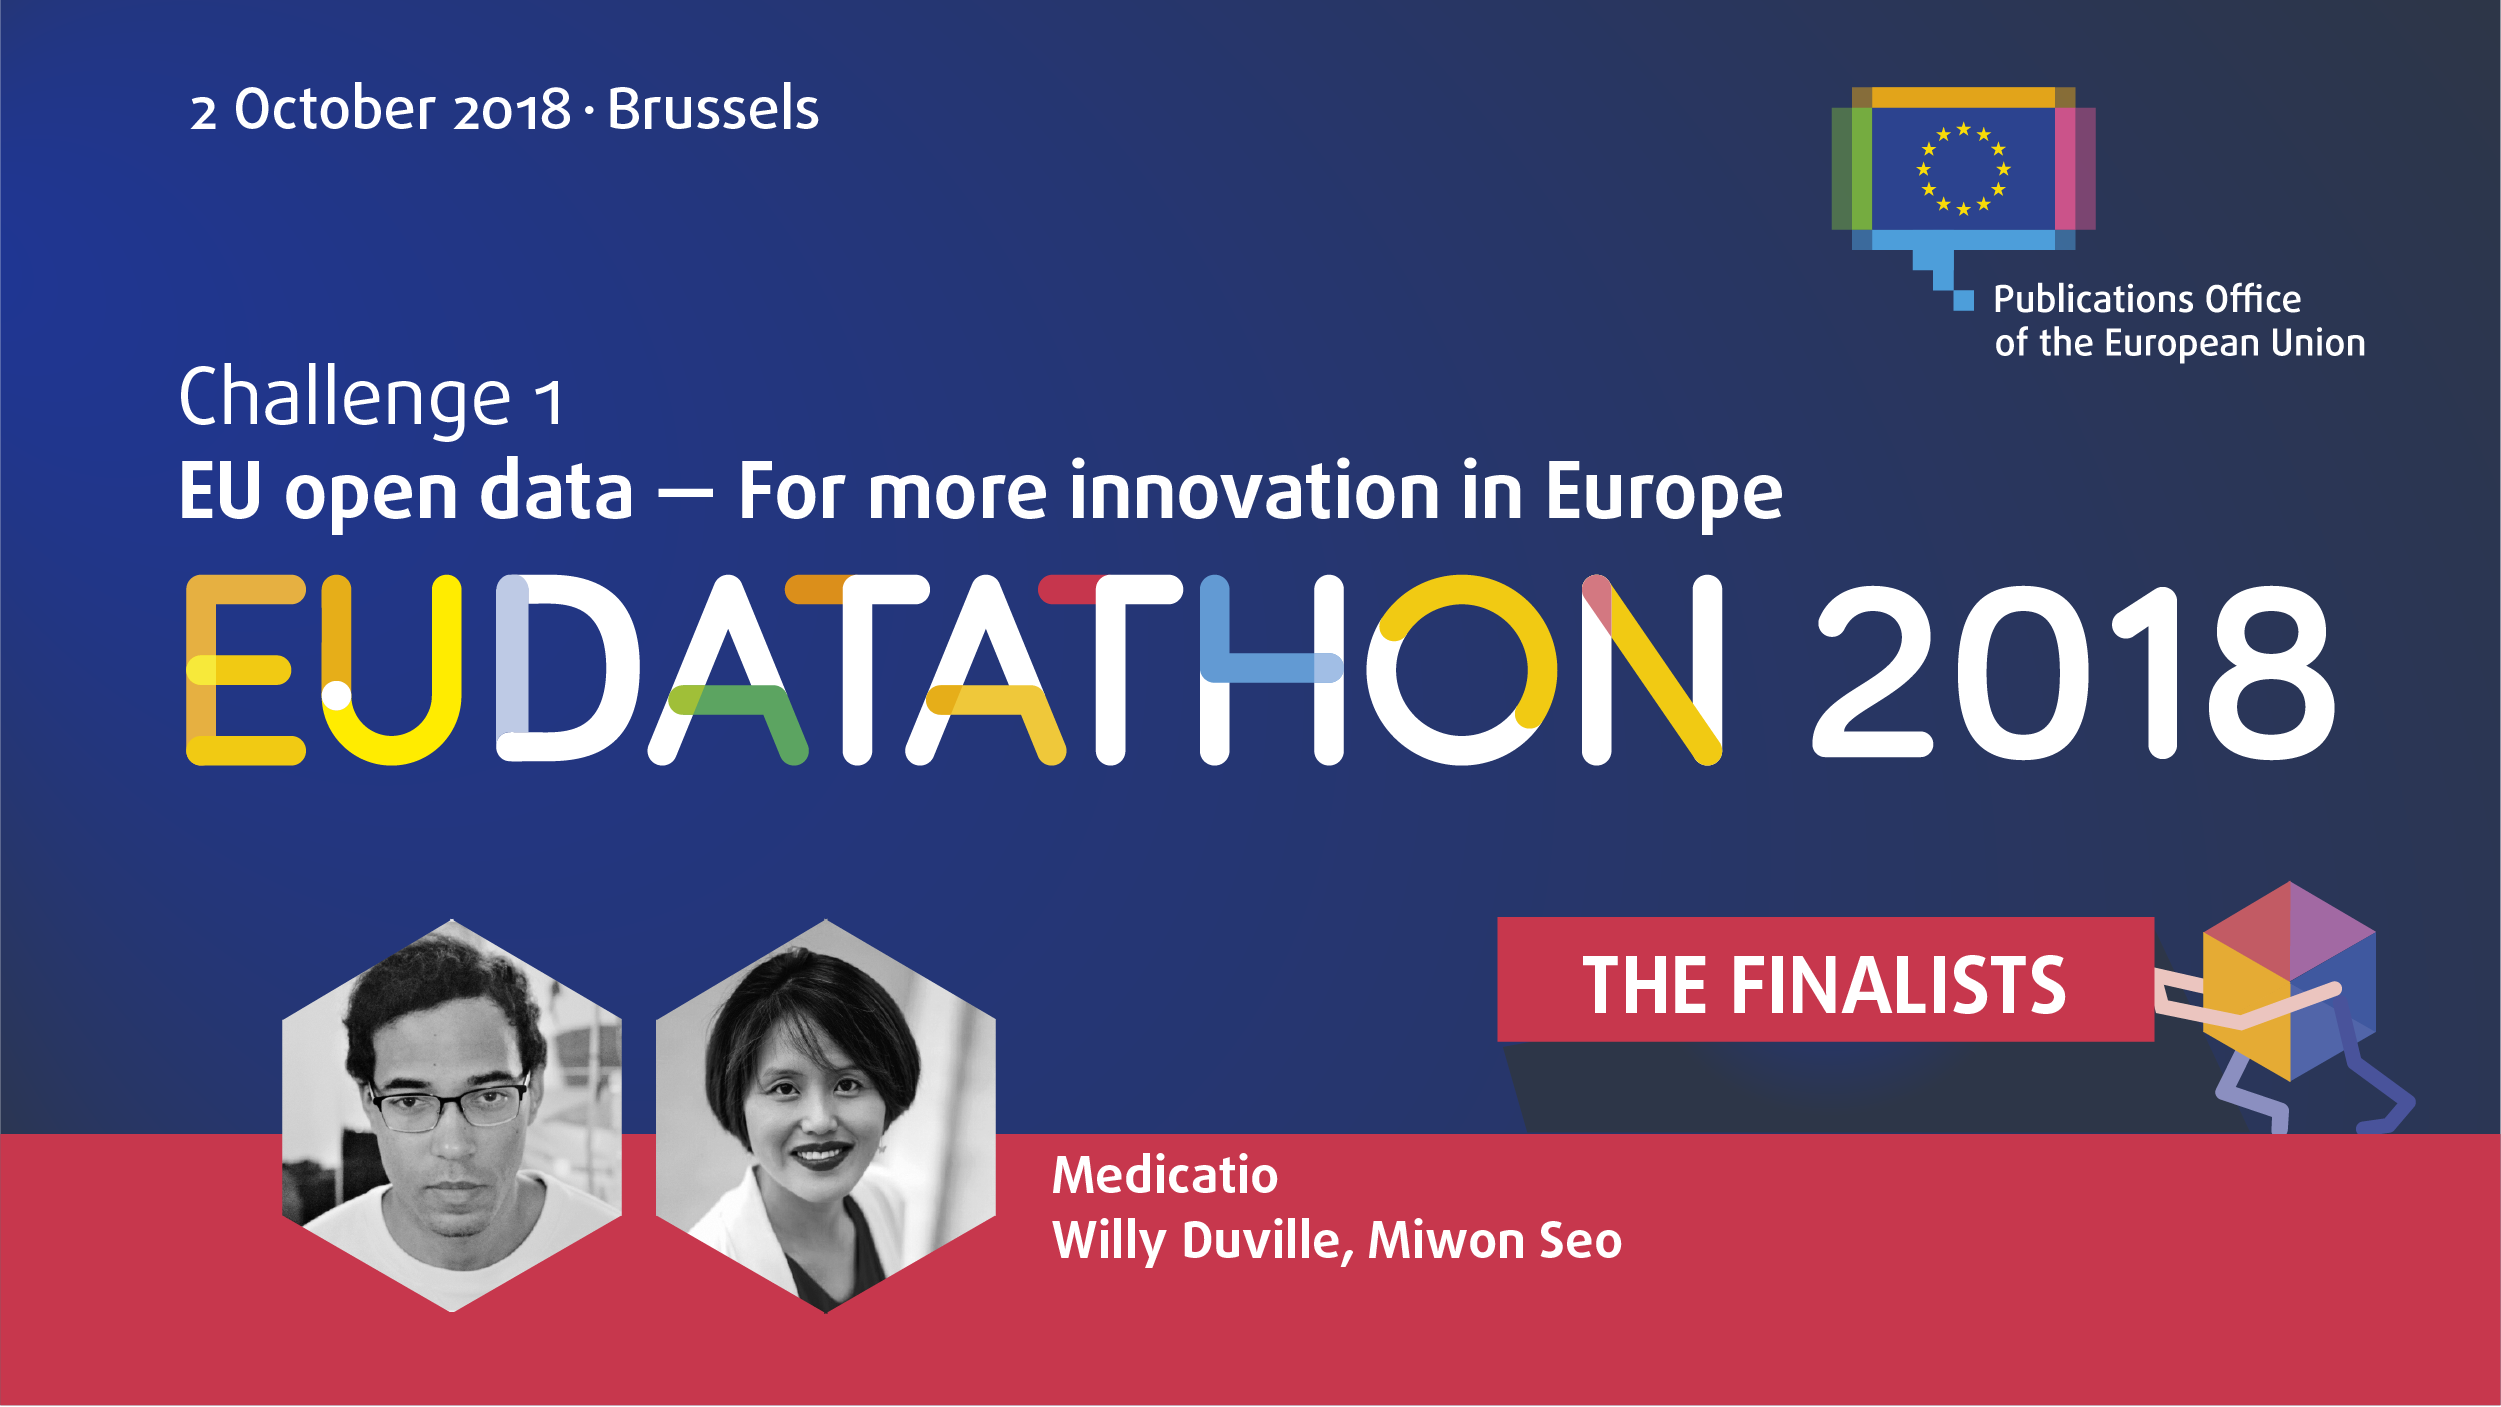 EU Datathon 2018 images for all challenges